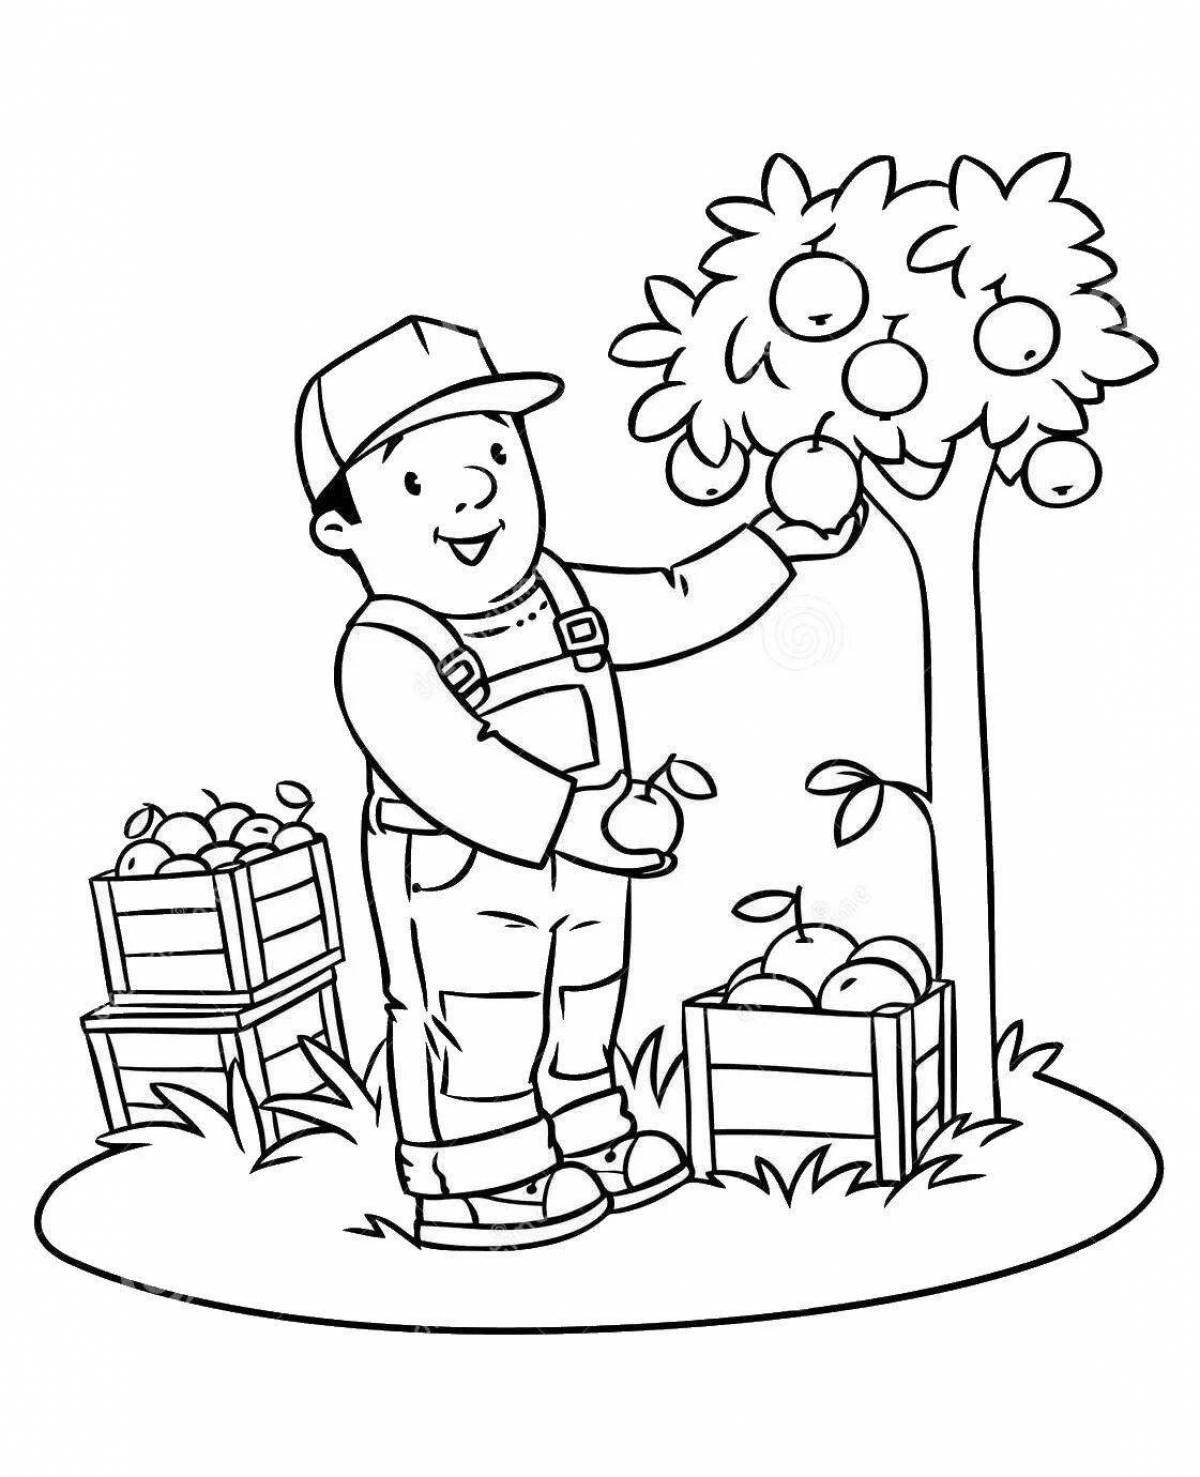 Coloring book knowledgeable gardener